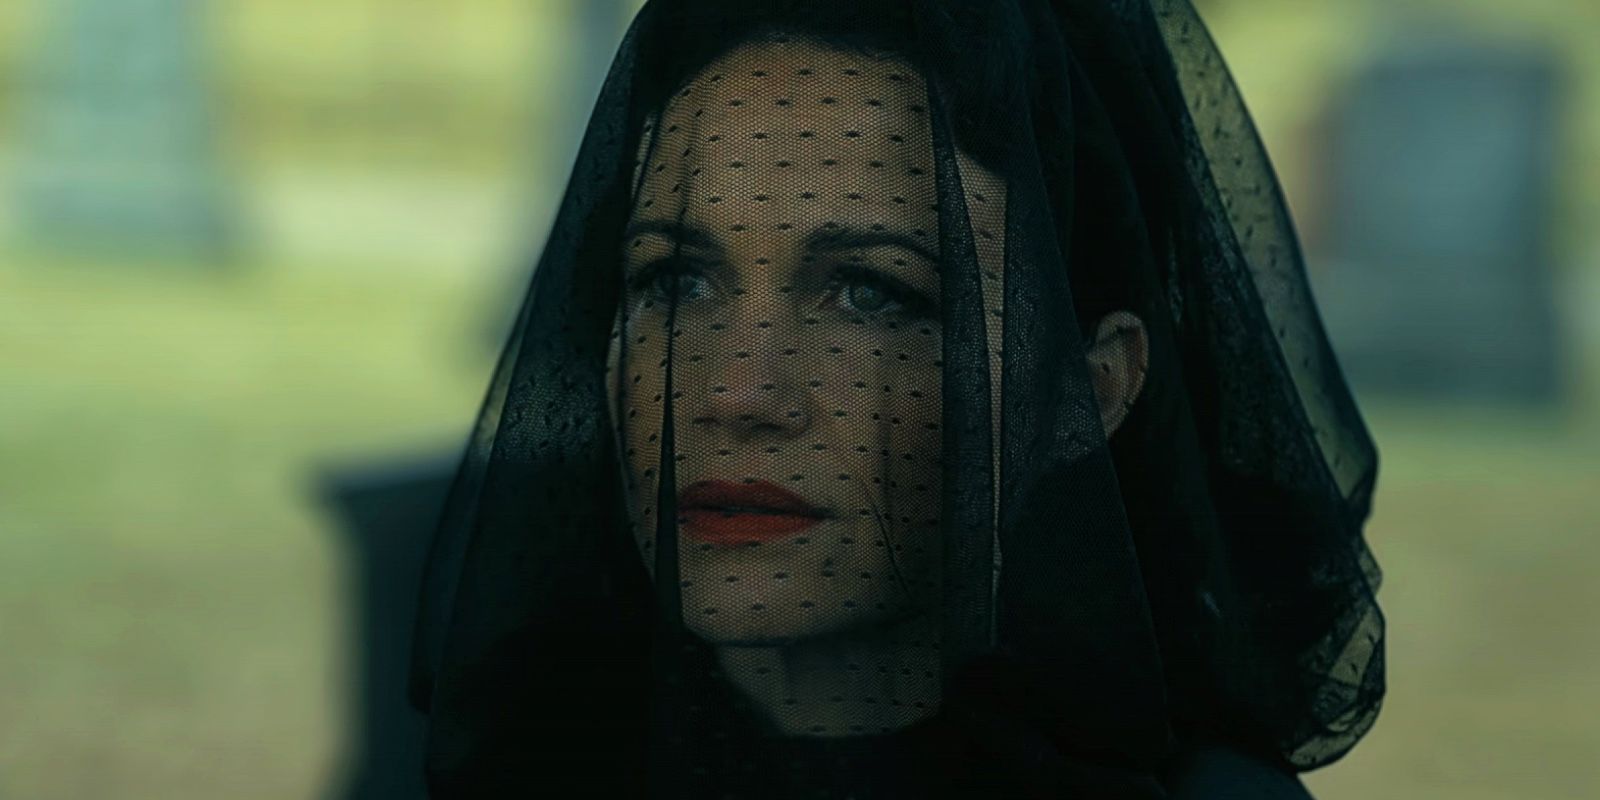 Carla Gugino as Verna standing at the Usher's graves in The Fall of the House of Usher